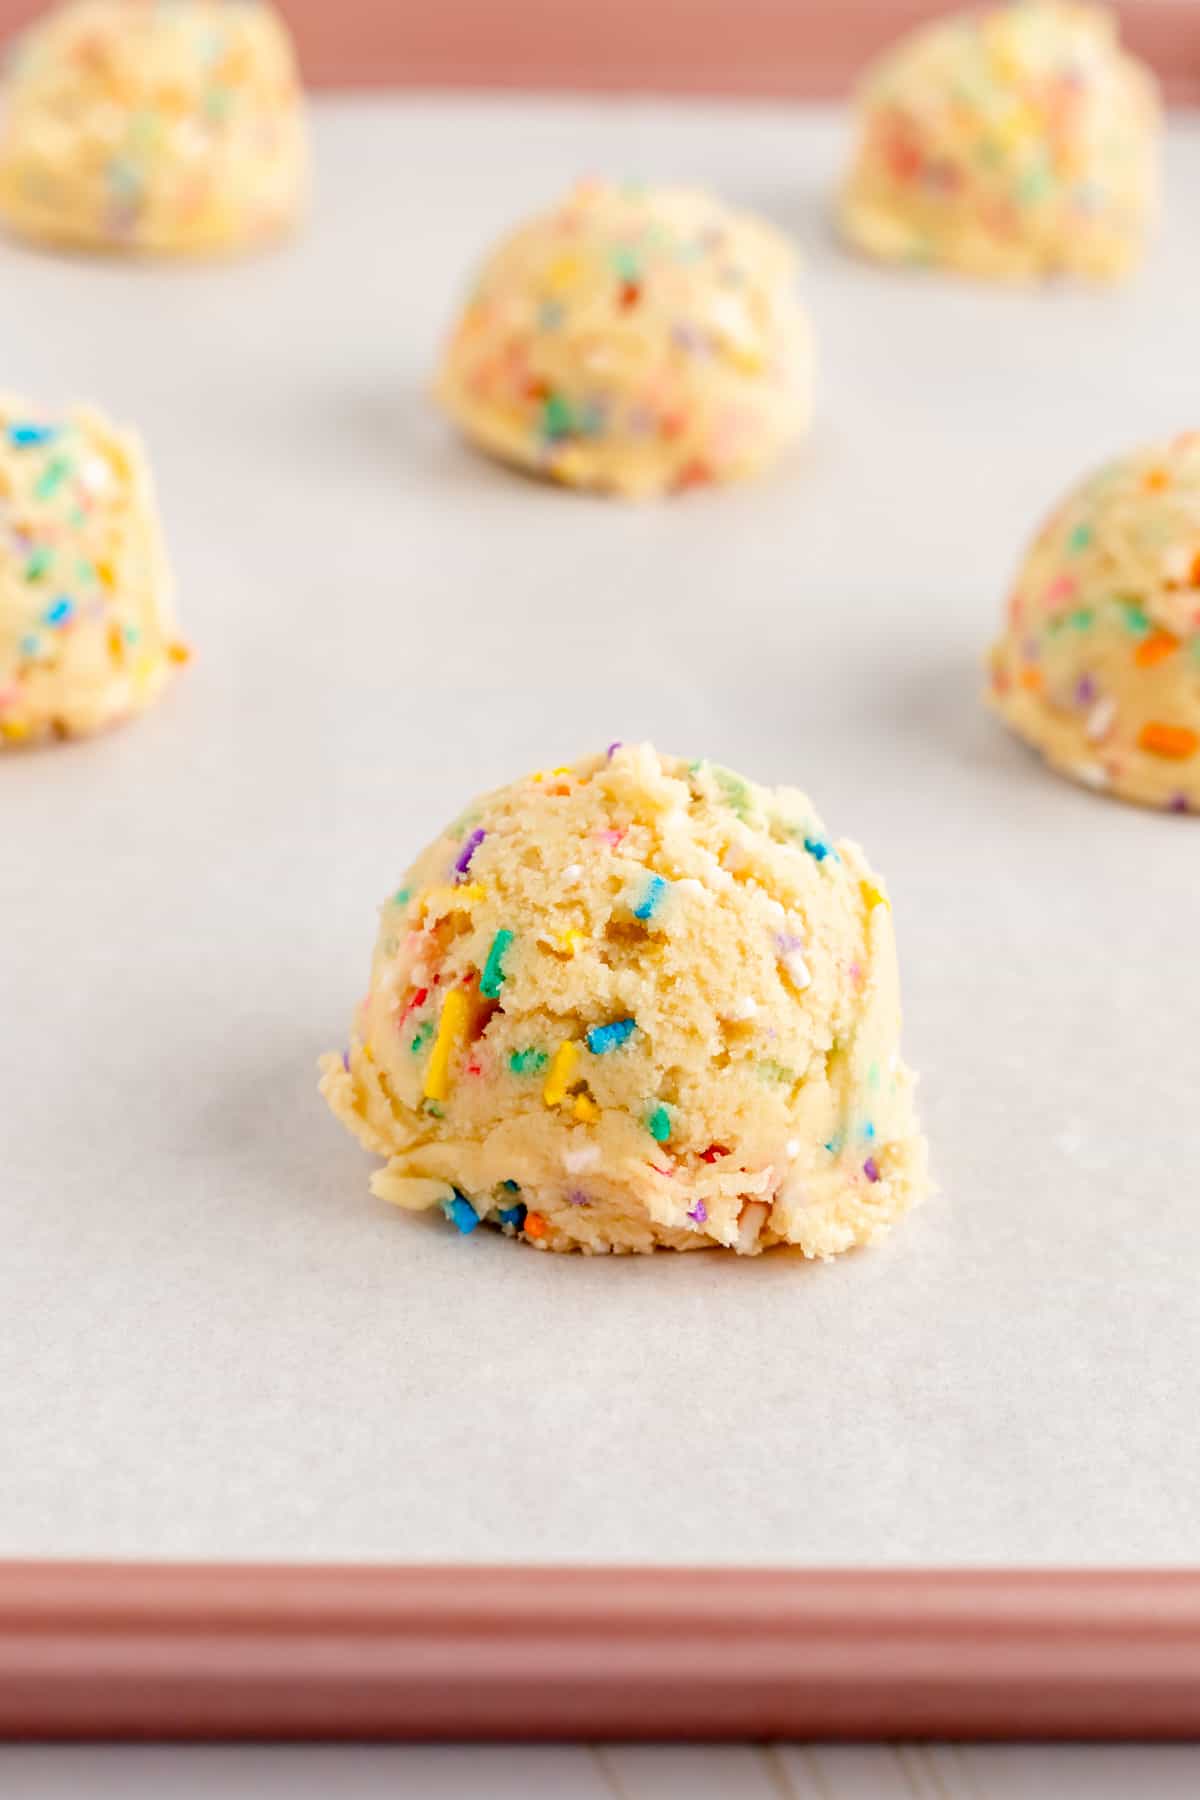 Scooped funfetti dough balls on a parchment lined pink baking pan.